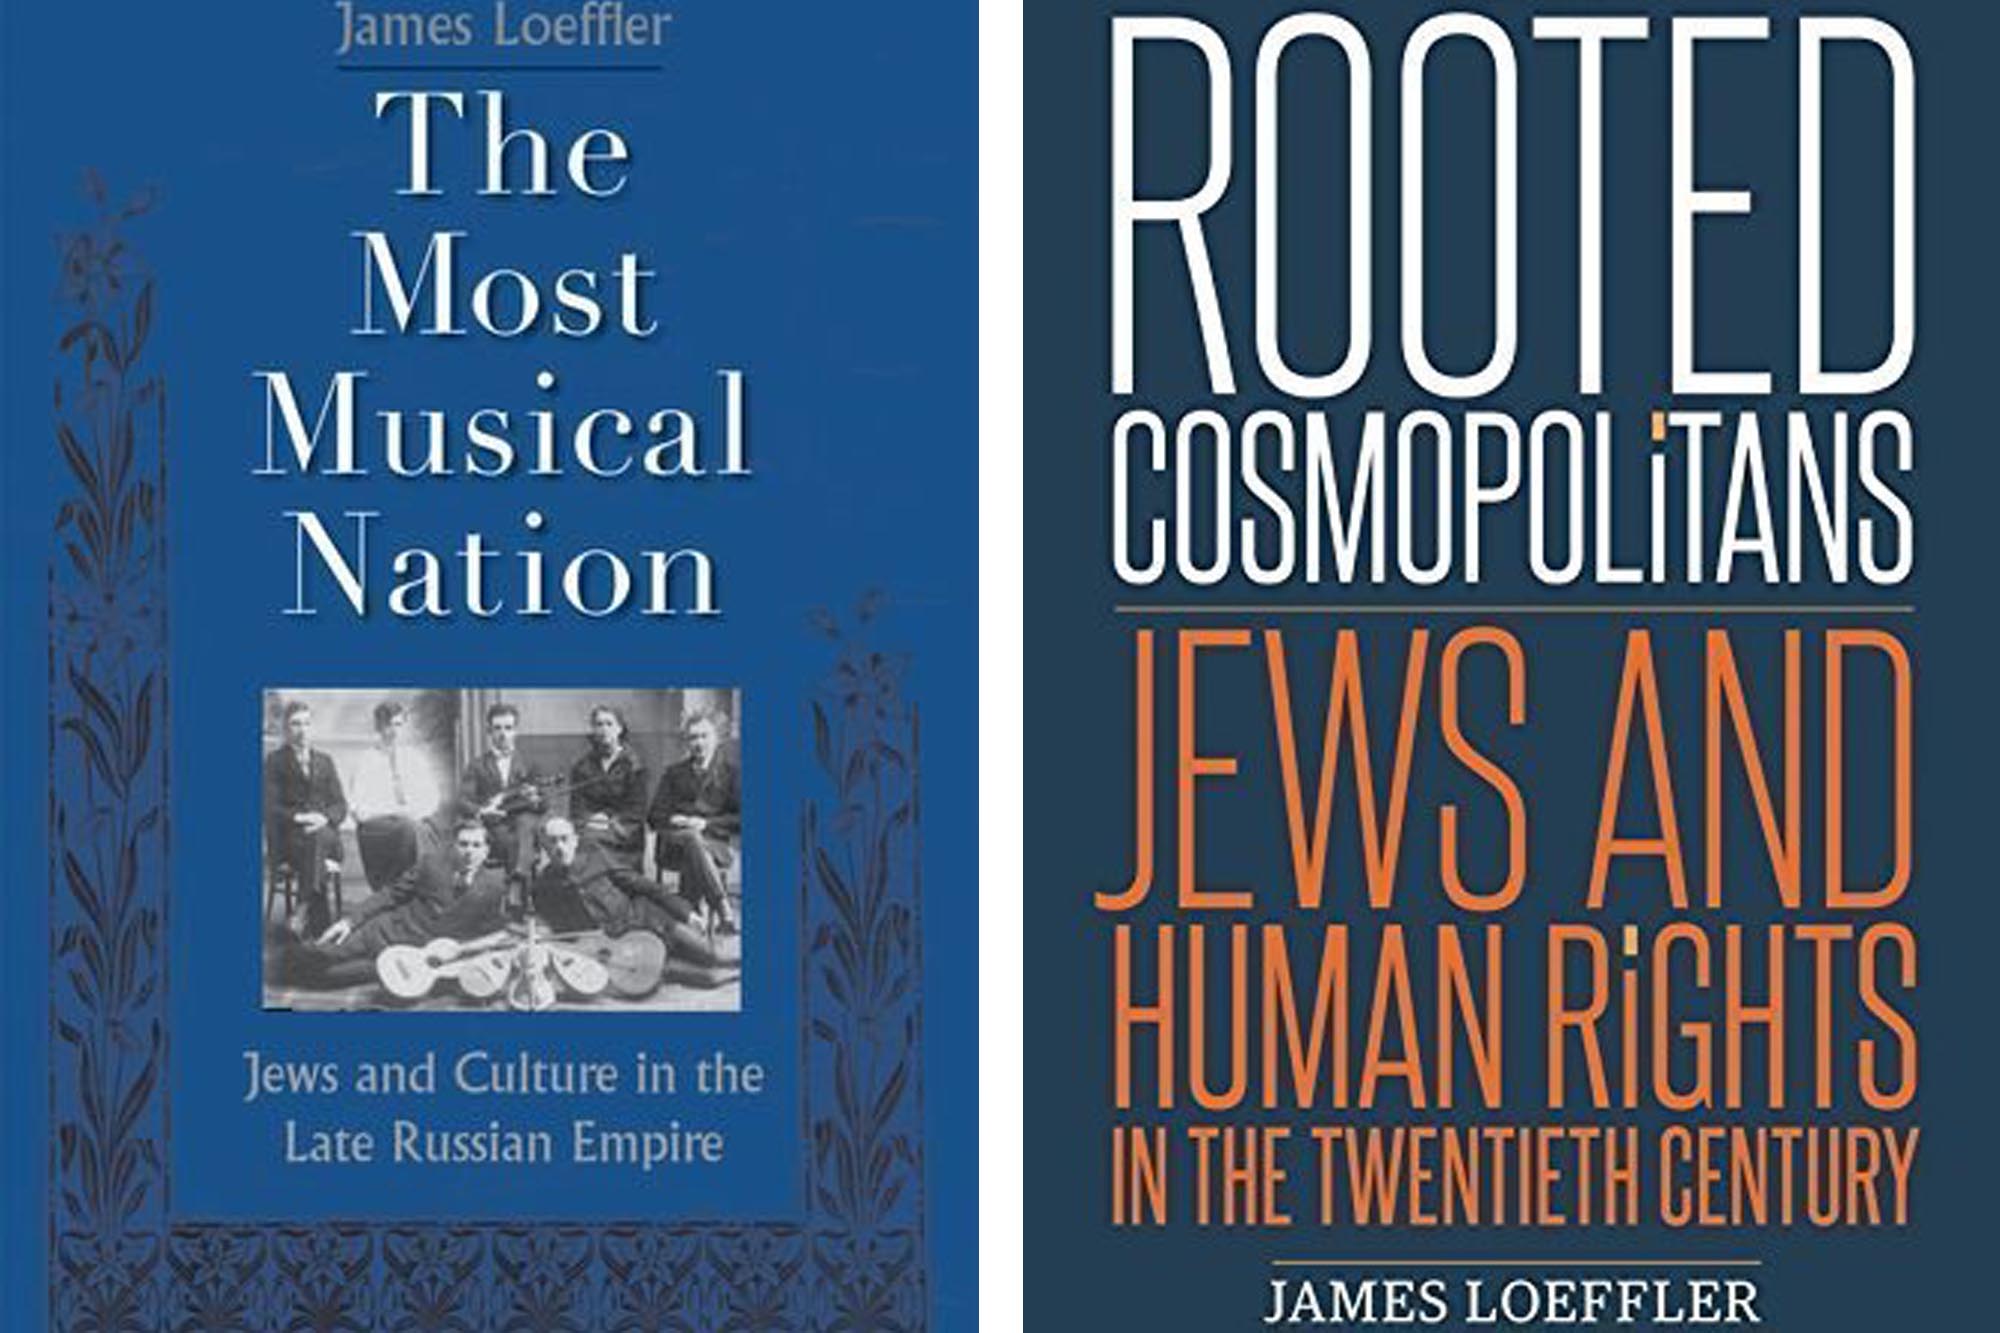 Left: book cover that reads The most Musical Nation Jews and Culture in the Late Russian Empire right: book cover that reads Rooted Cosmopolitans jews and human rights in the twentieth century